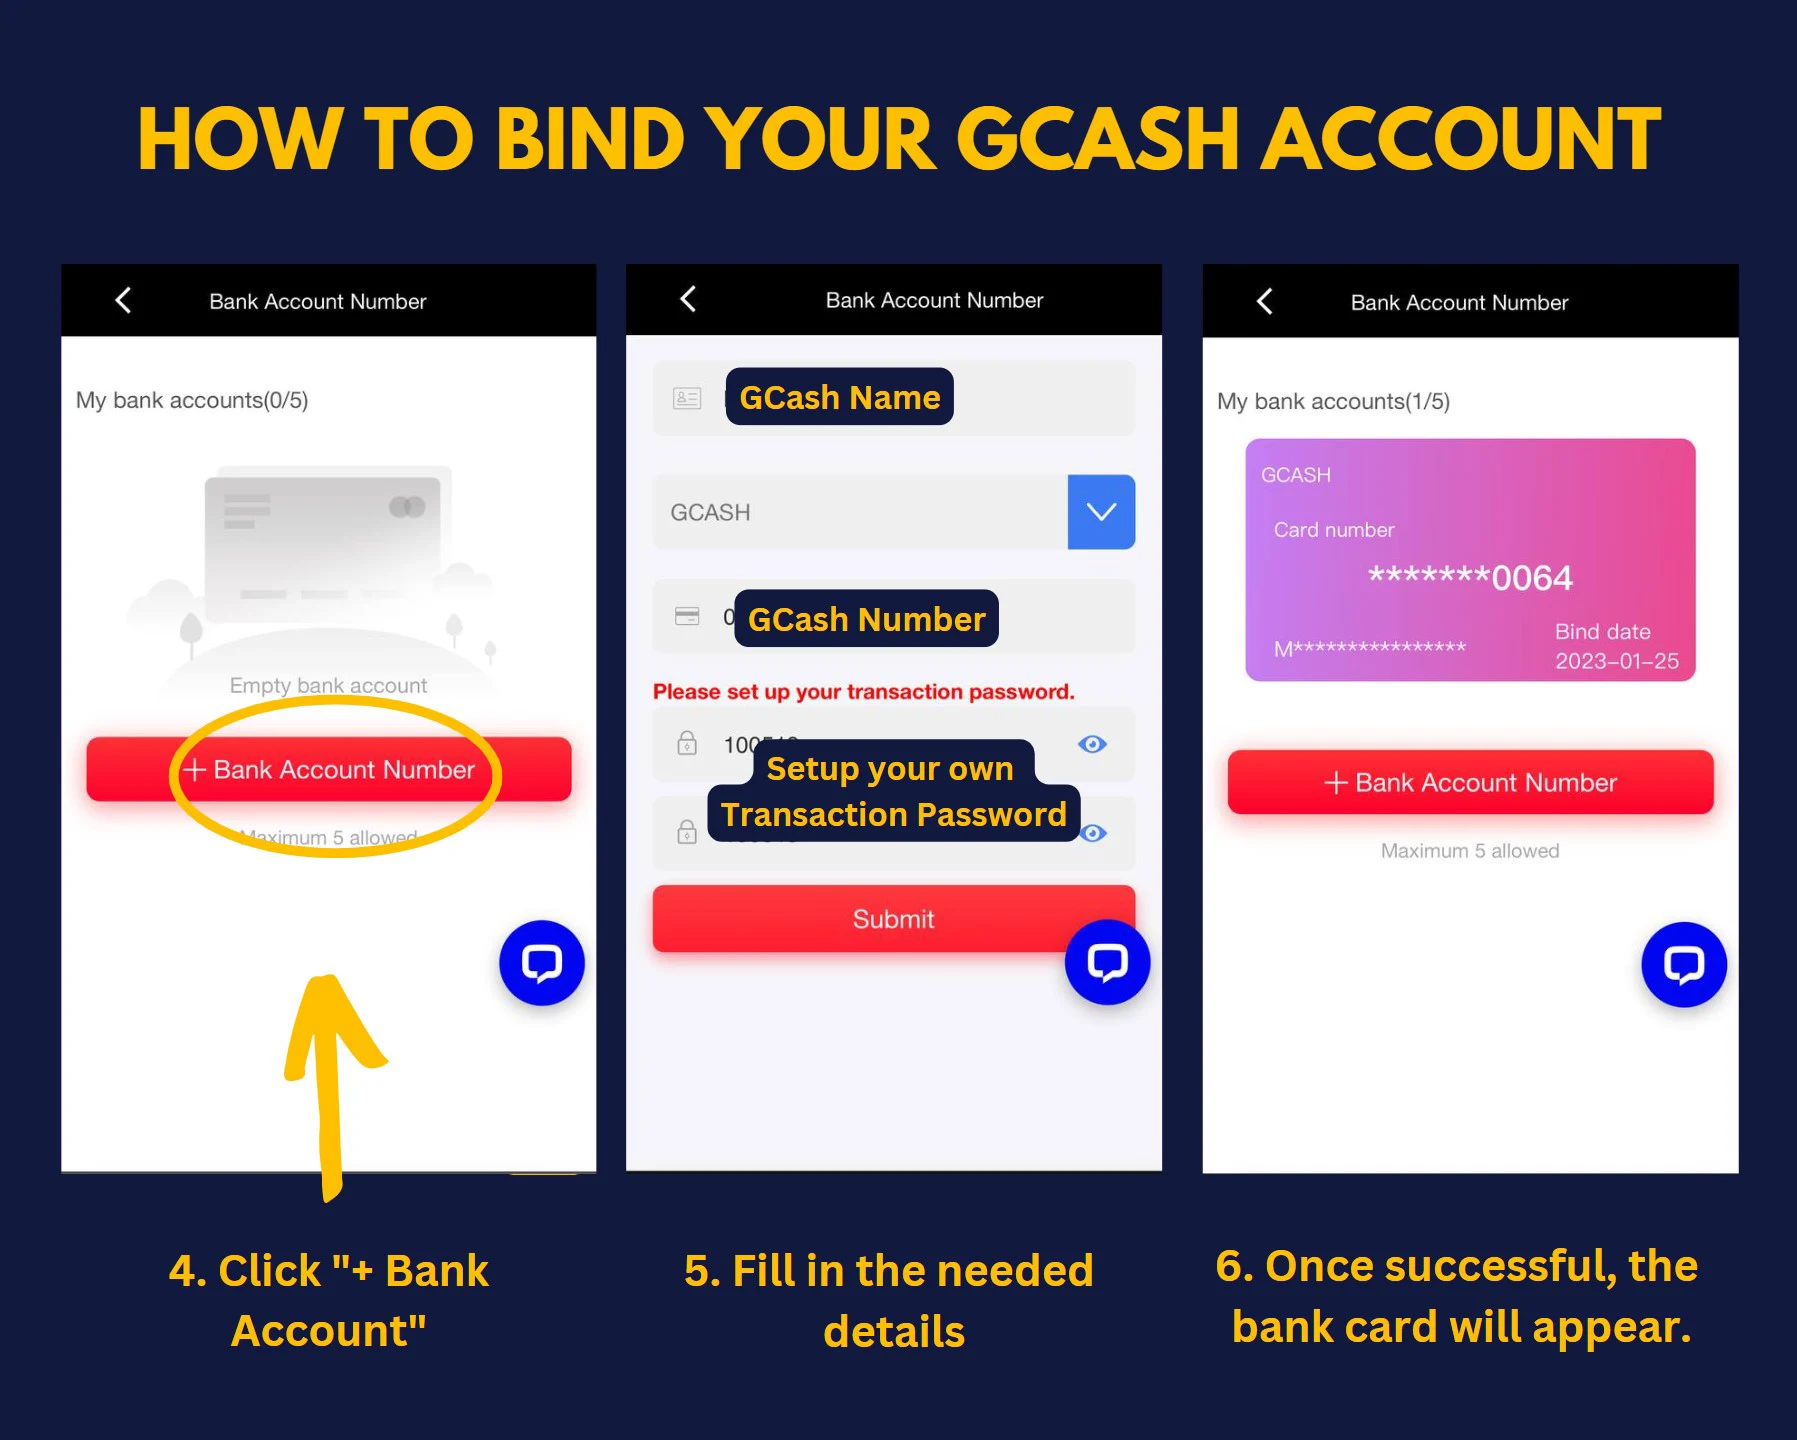 How to bind your GCash (2) - Copy